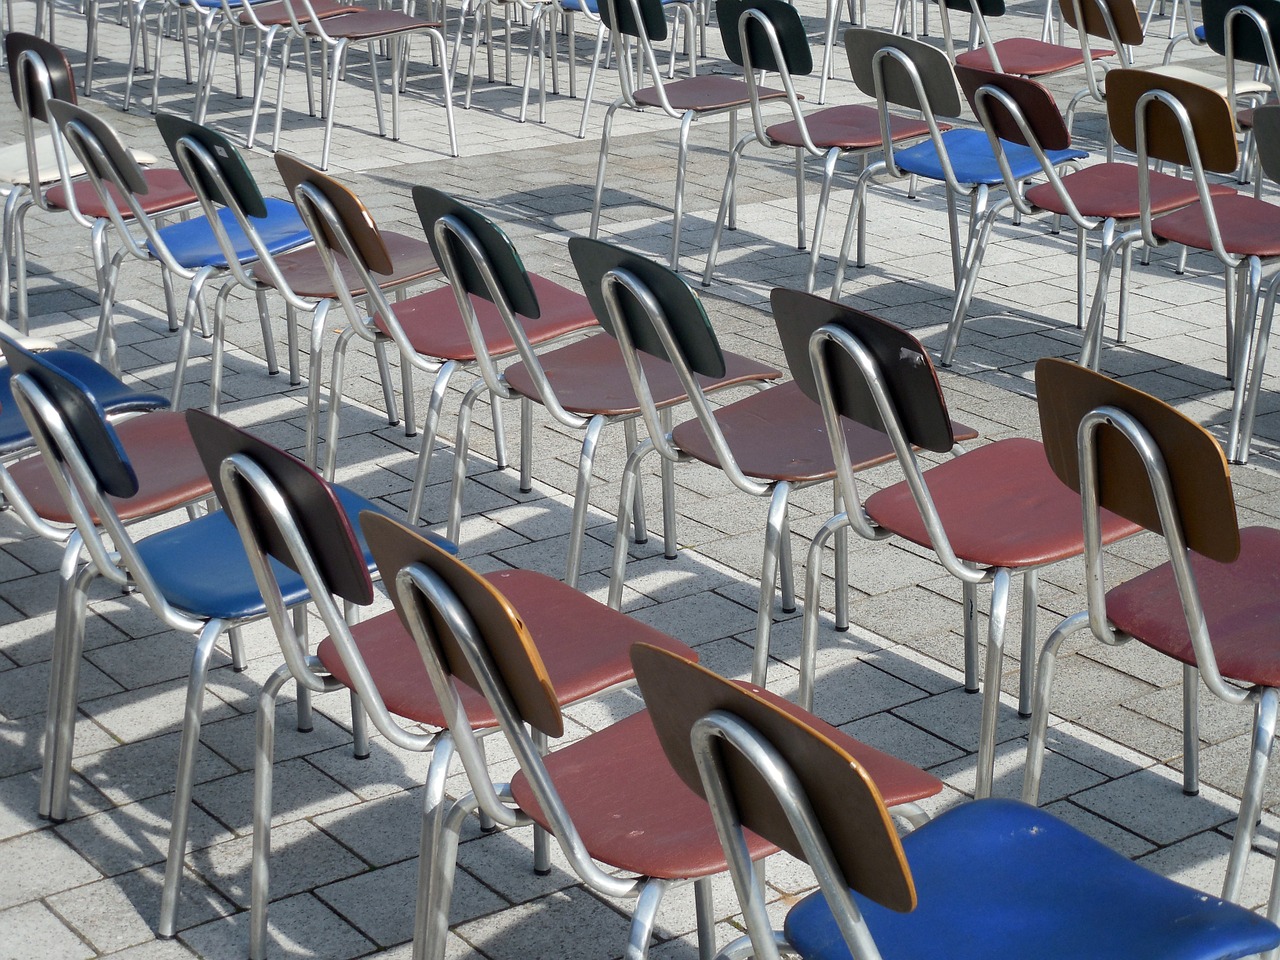 chairs chair series rows of seats free photo